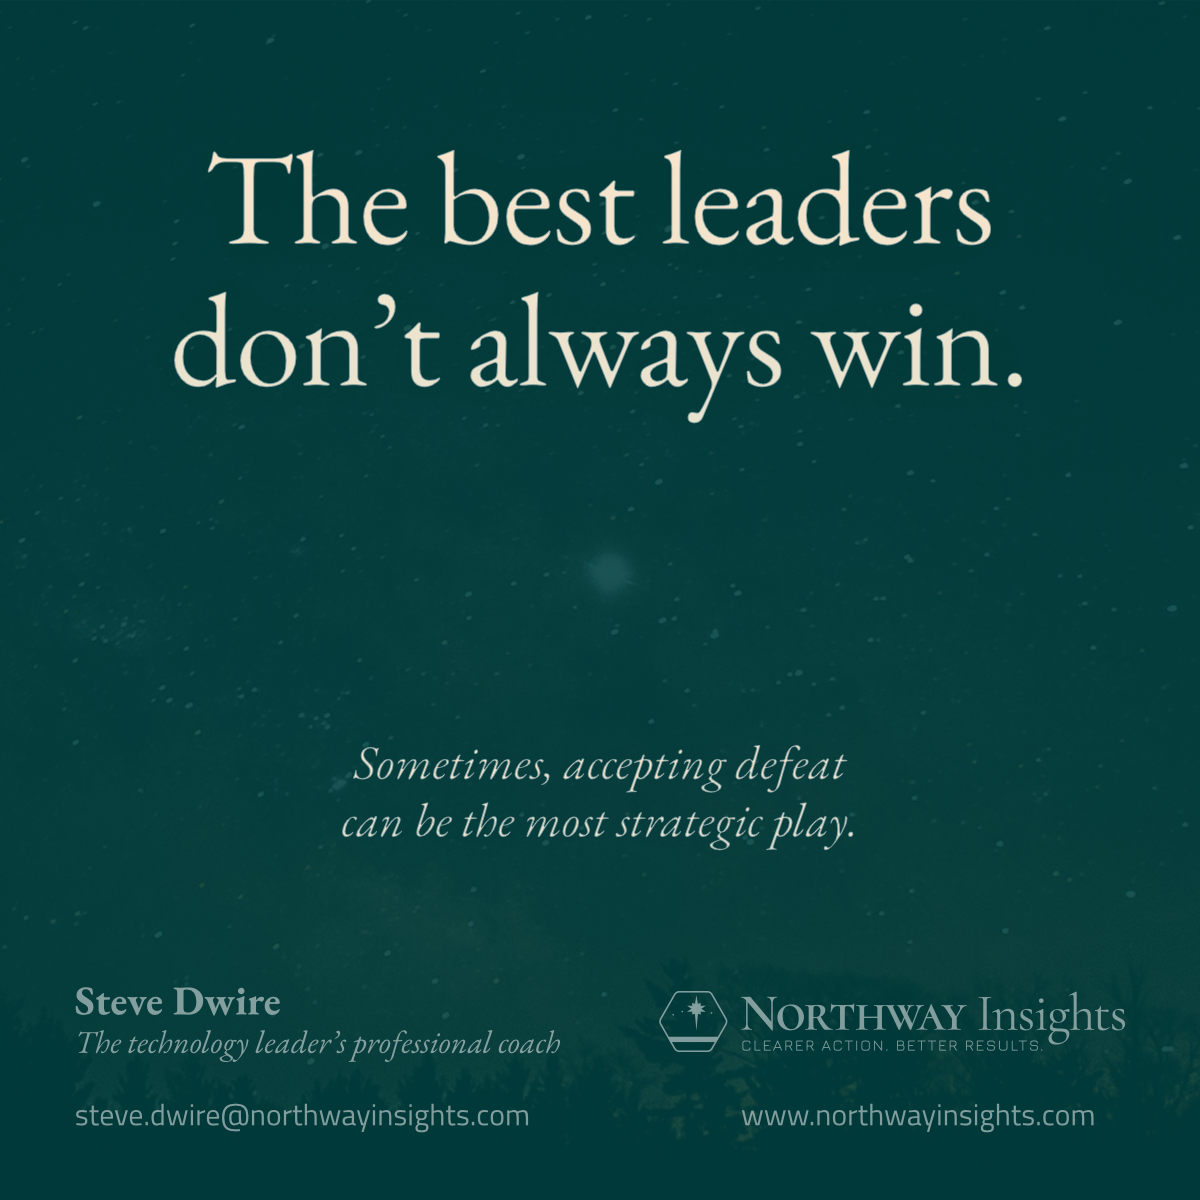 The best leaders don't always win. (Sometimes, accepting defeat can be the most strategic play.)